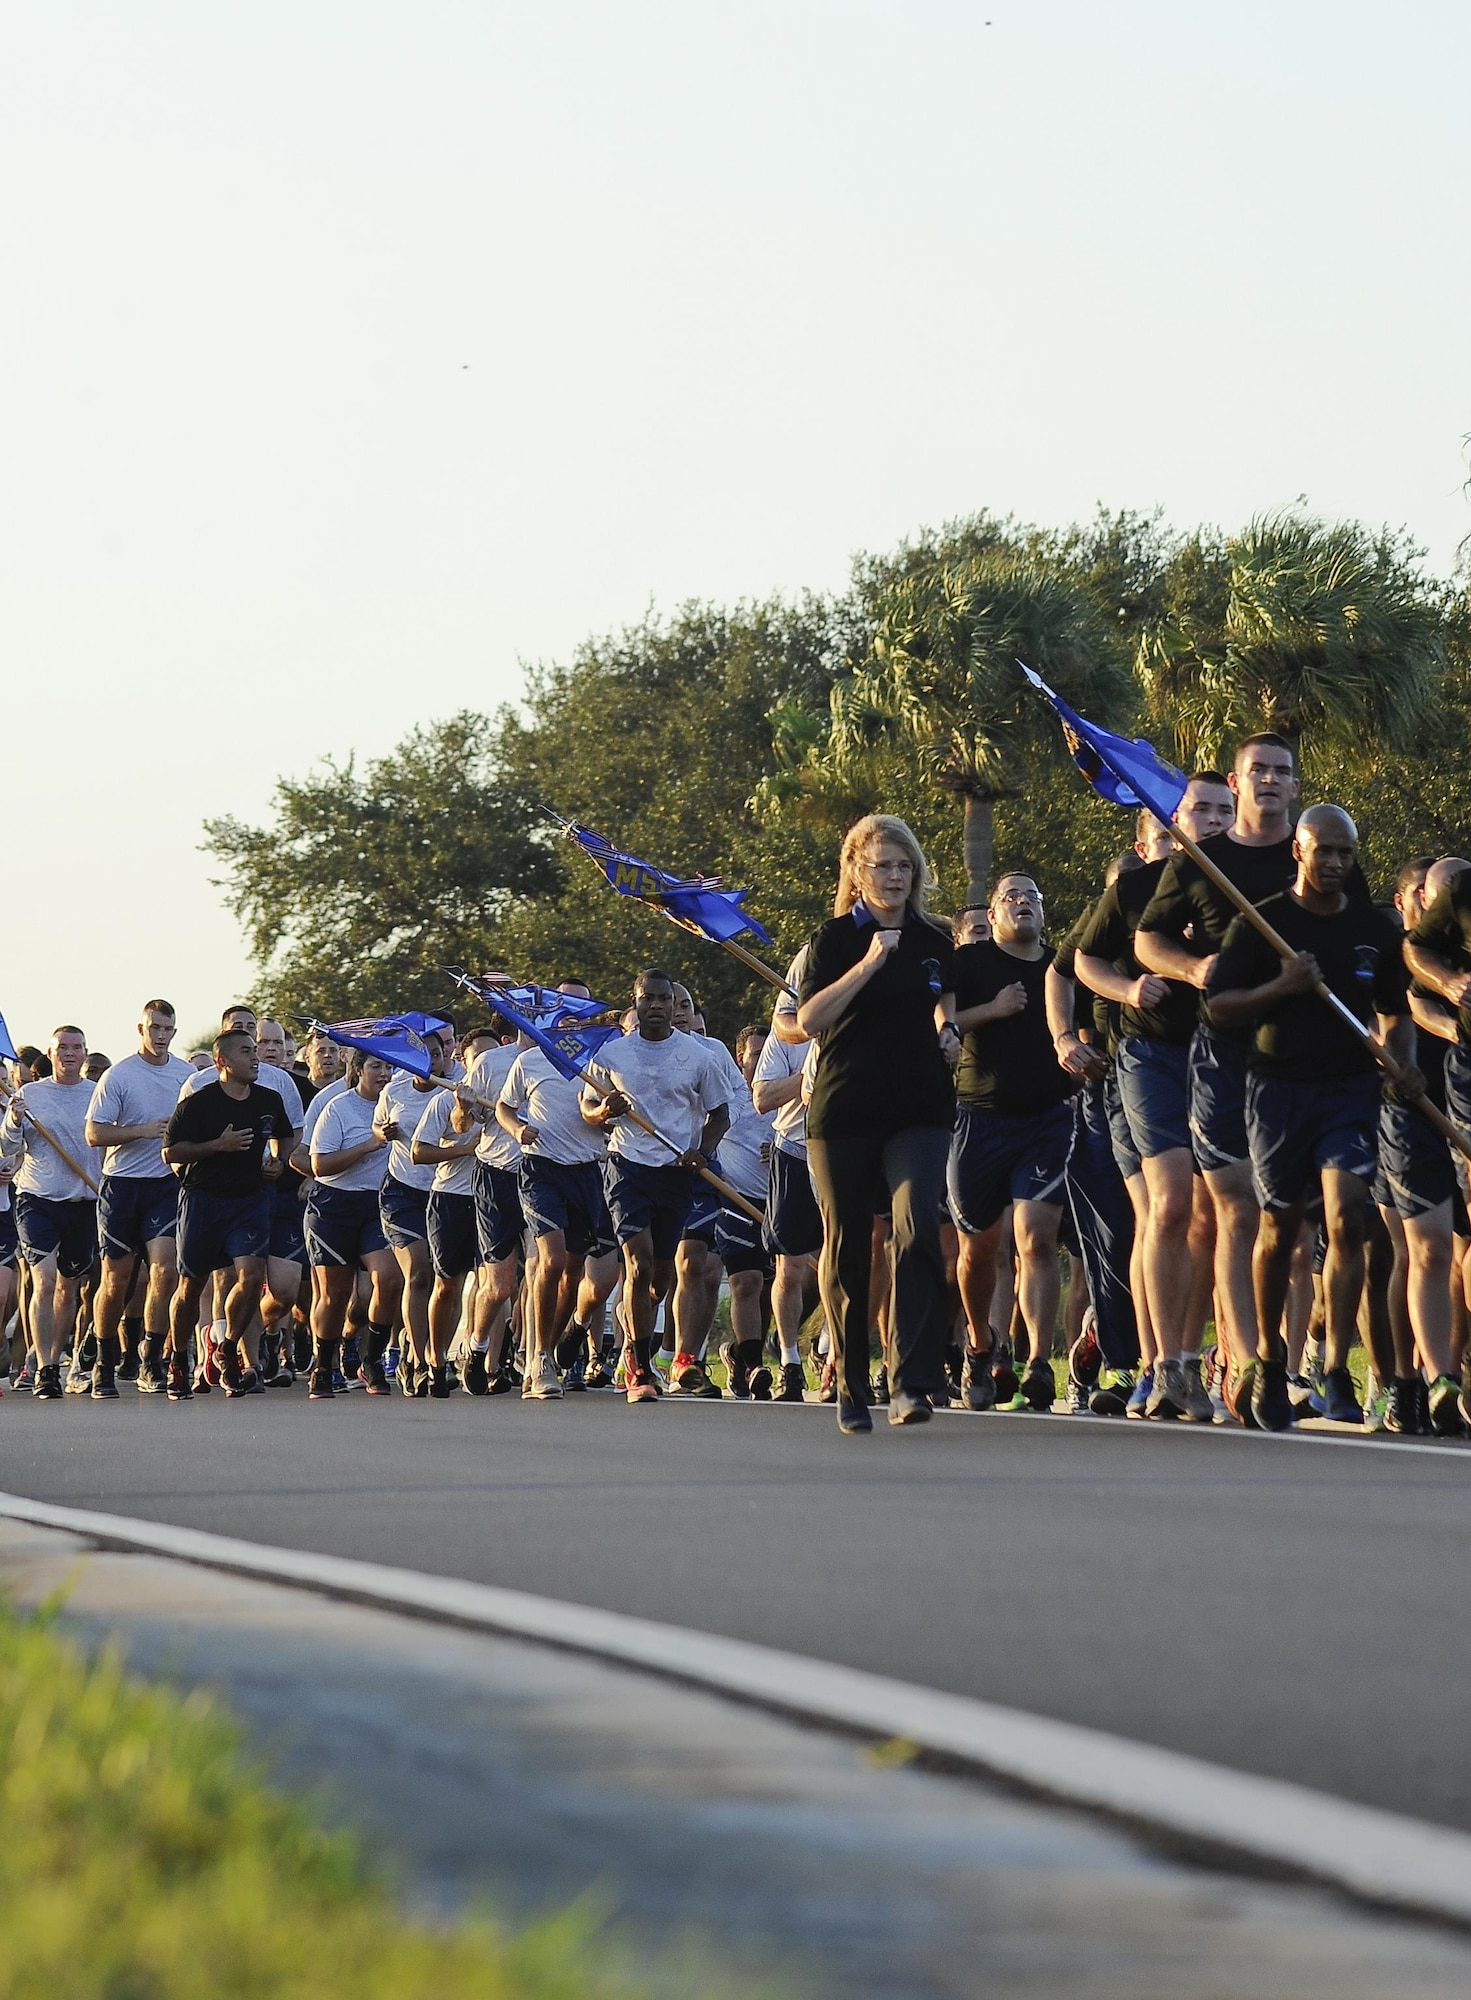 Members of Team MacDill run in formation during the 6th Annual Helton Haul Memorial Run at MacDill Air Force Base, Fla., Sept. 8, 2016. The annual run is held in memory of 1st Lt. Joseph D. Helton, a security forces officer assigned to the 6th Security Forces Squadron, who was killed in during his deployment to Iraq in 2009. (U.S. Air Force photo by Airman 1st Class Mariette Adams)